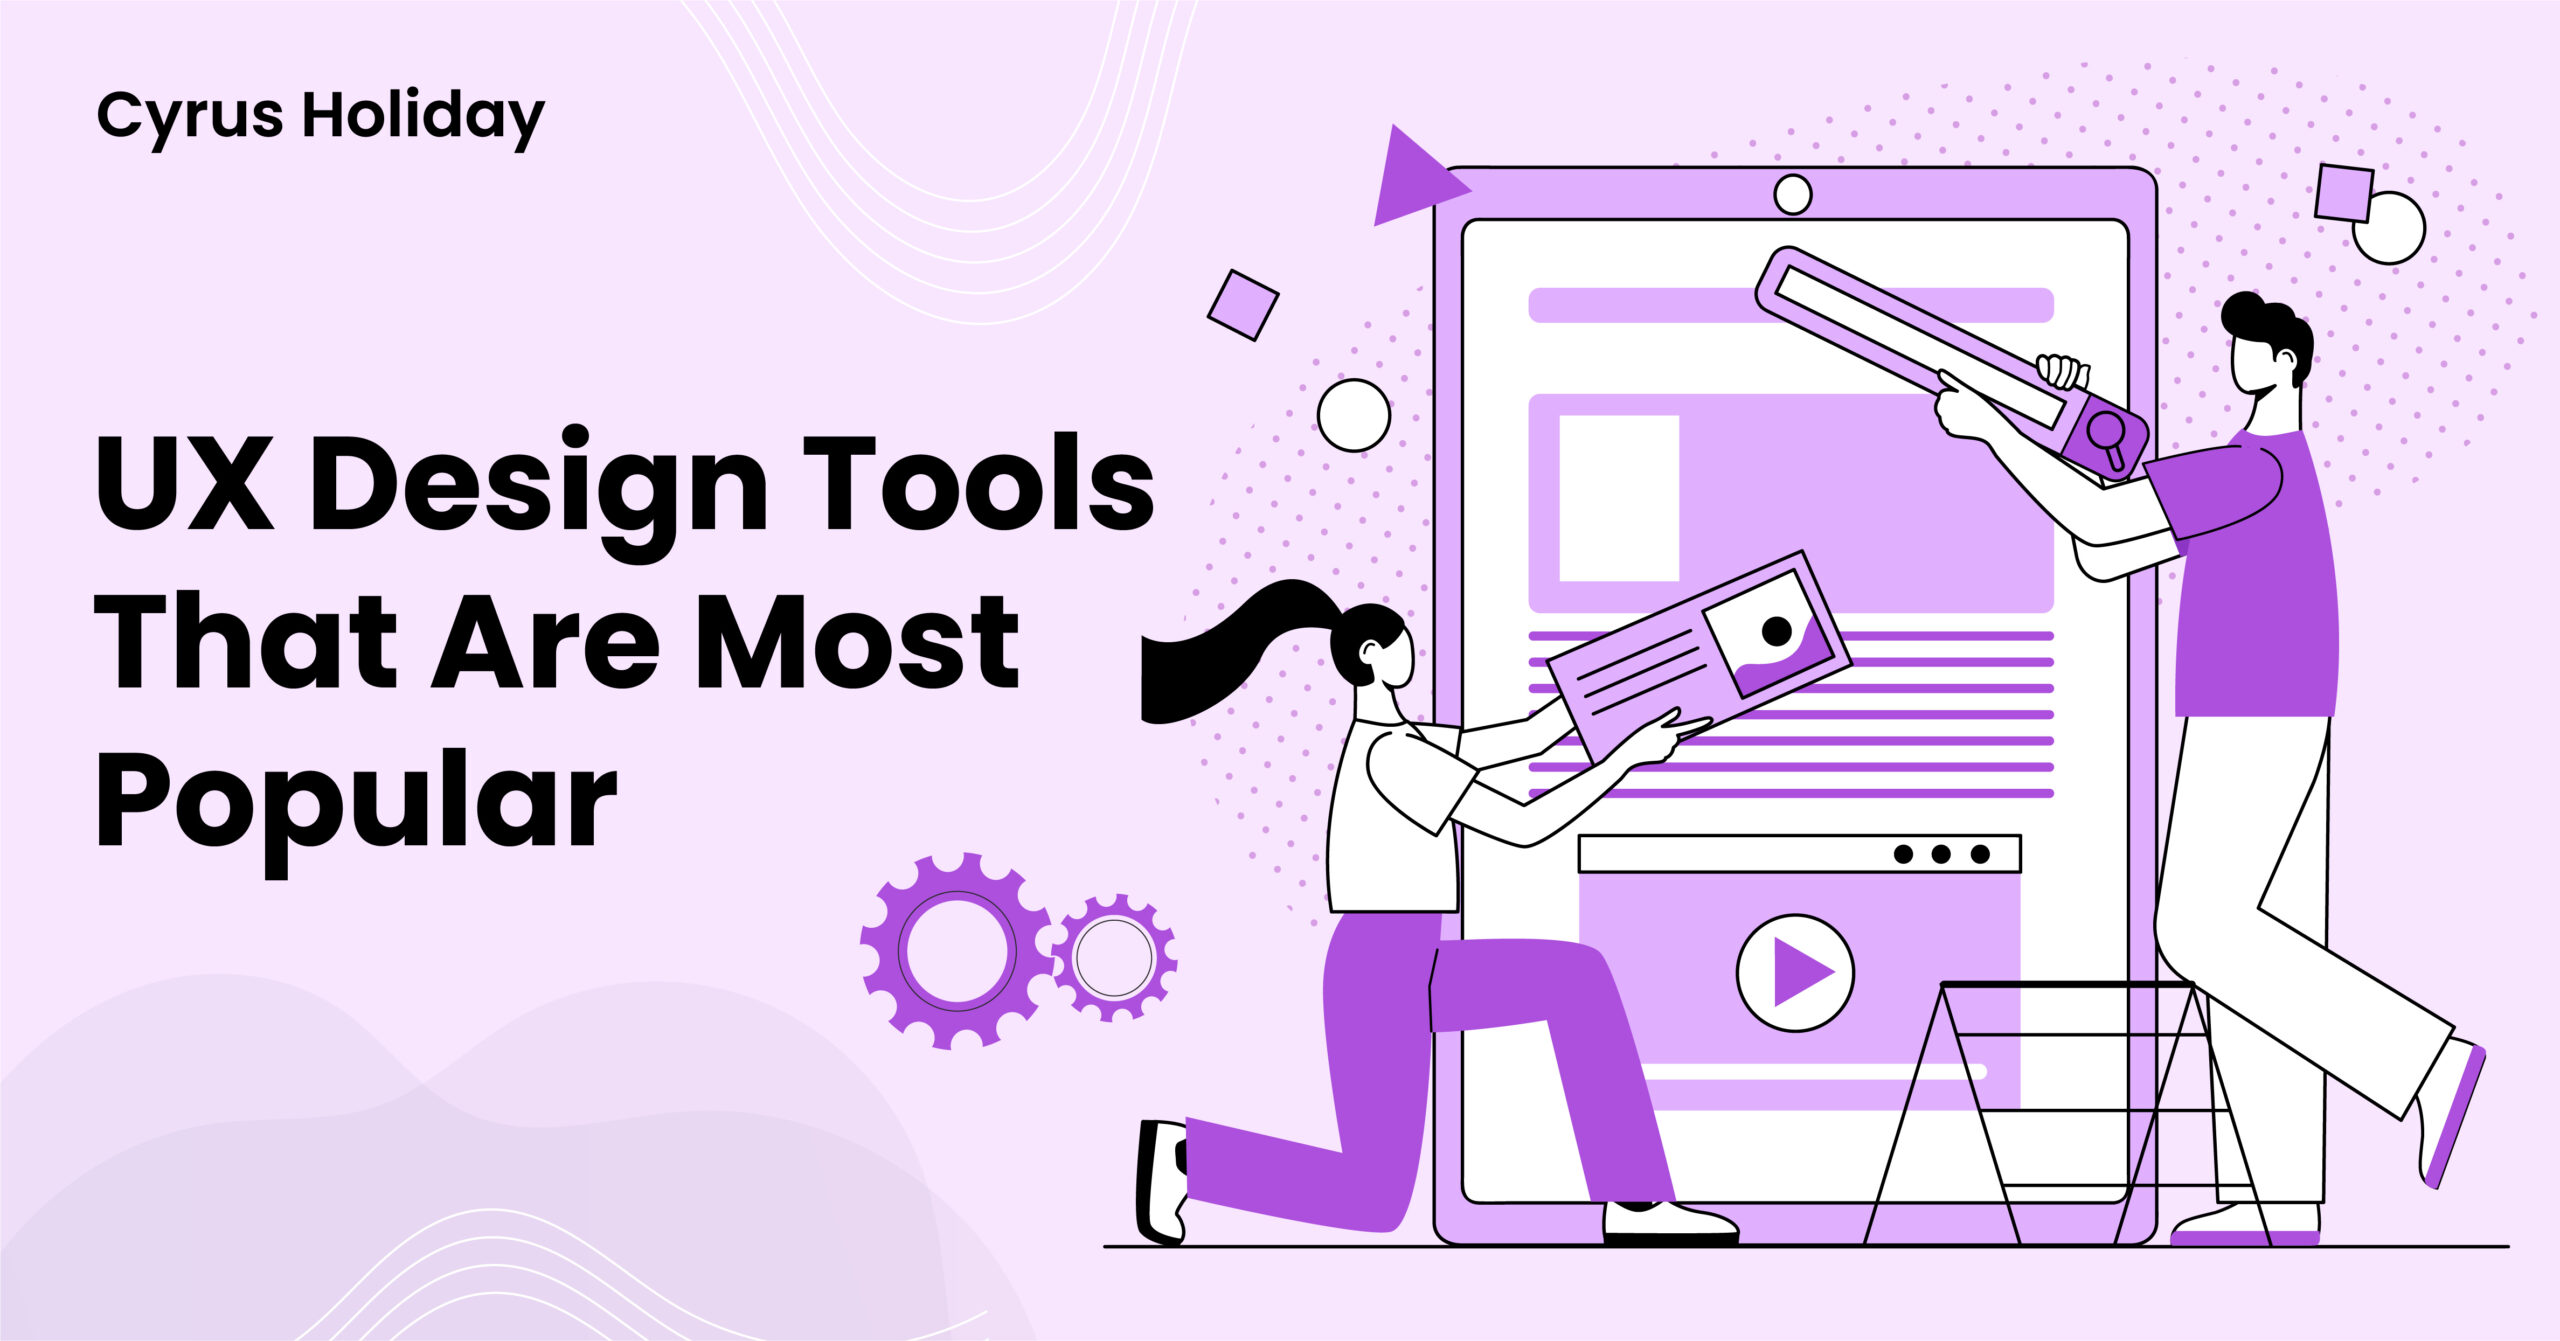 The 25 UX Design Tools That Are Most Popular